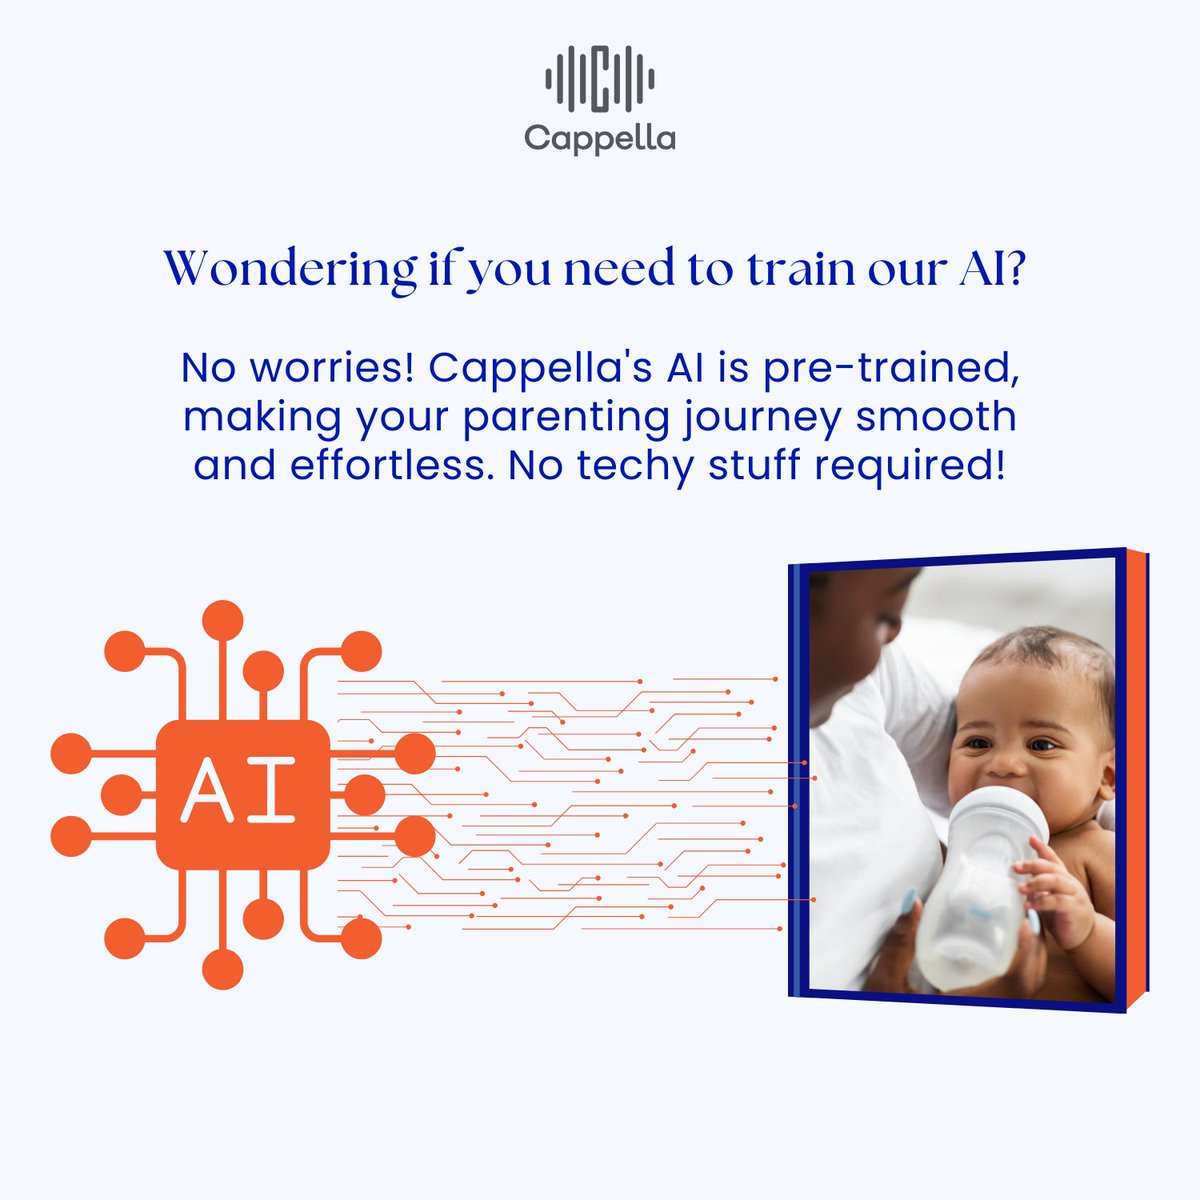 Wondering if you need to train our AI? 

No worries! Cappella's AI is pre-trained, making your parenting journey smooth and effortless. 

No techy stuff required!
.
.
.
#babystuff #onlineshopping #newmom #babyfood #perlengkapanbayi #instababy #twistshake #bayi #parenthood